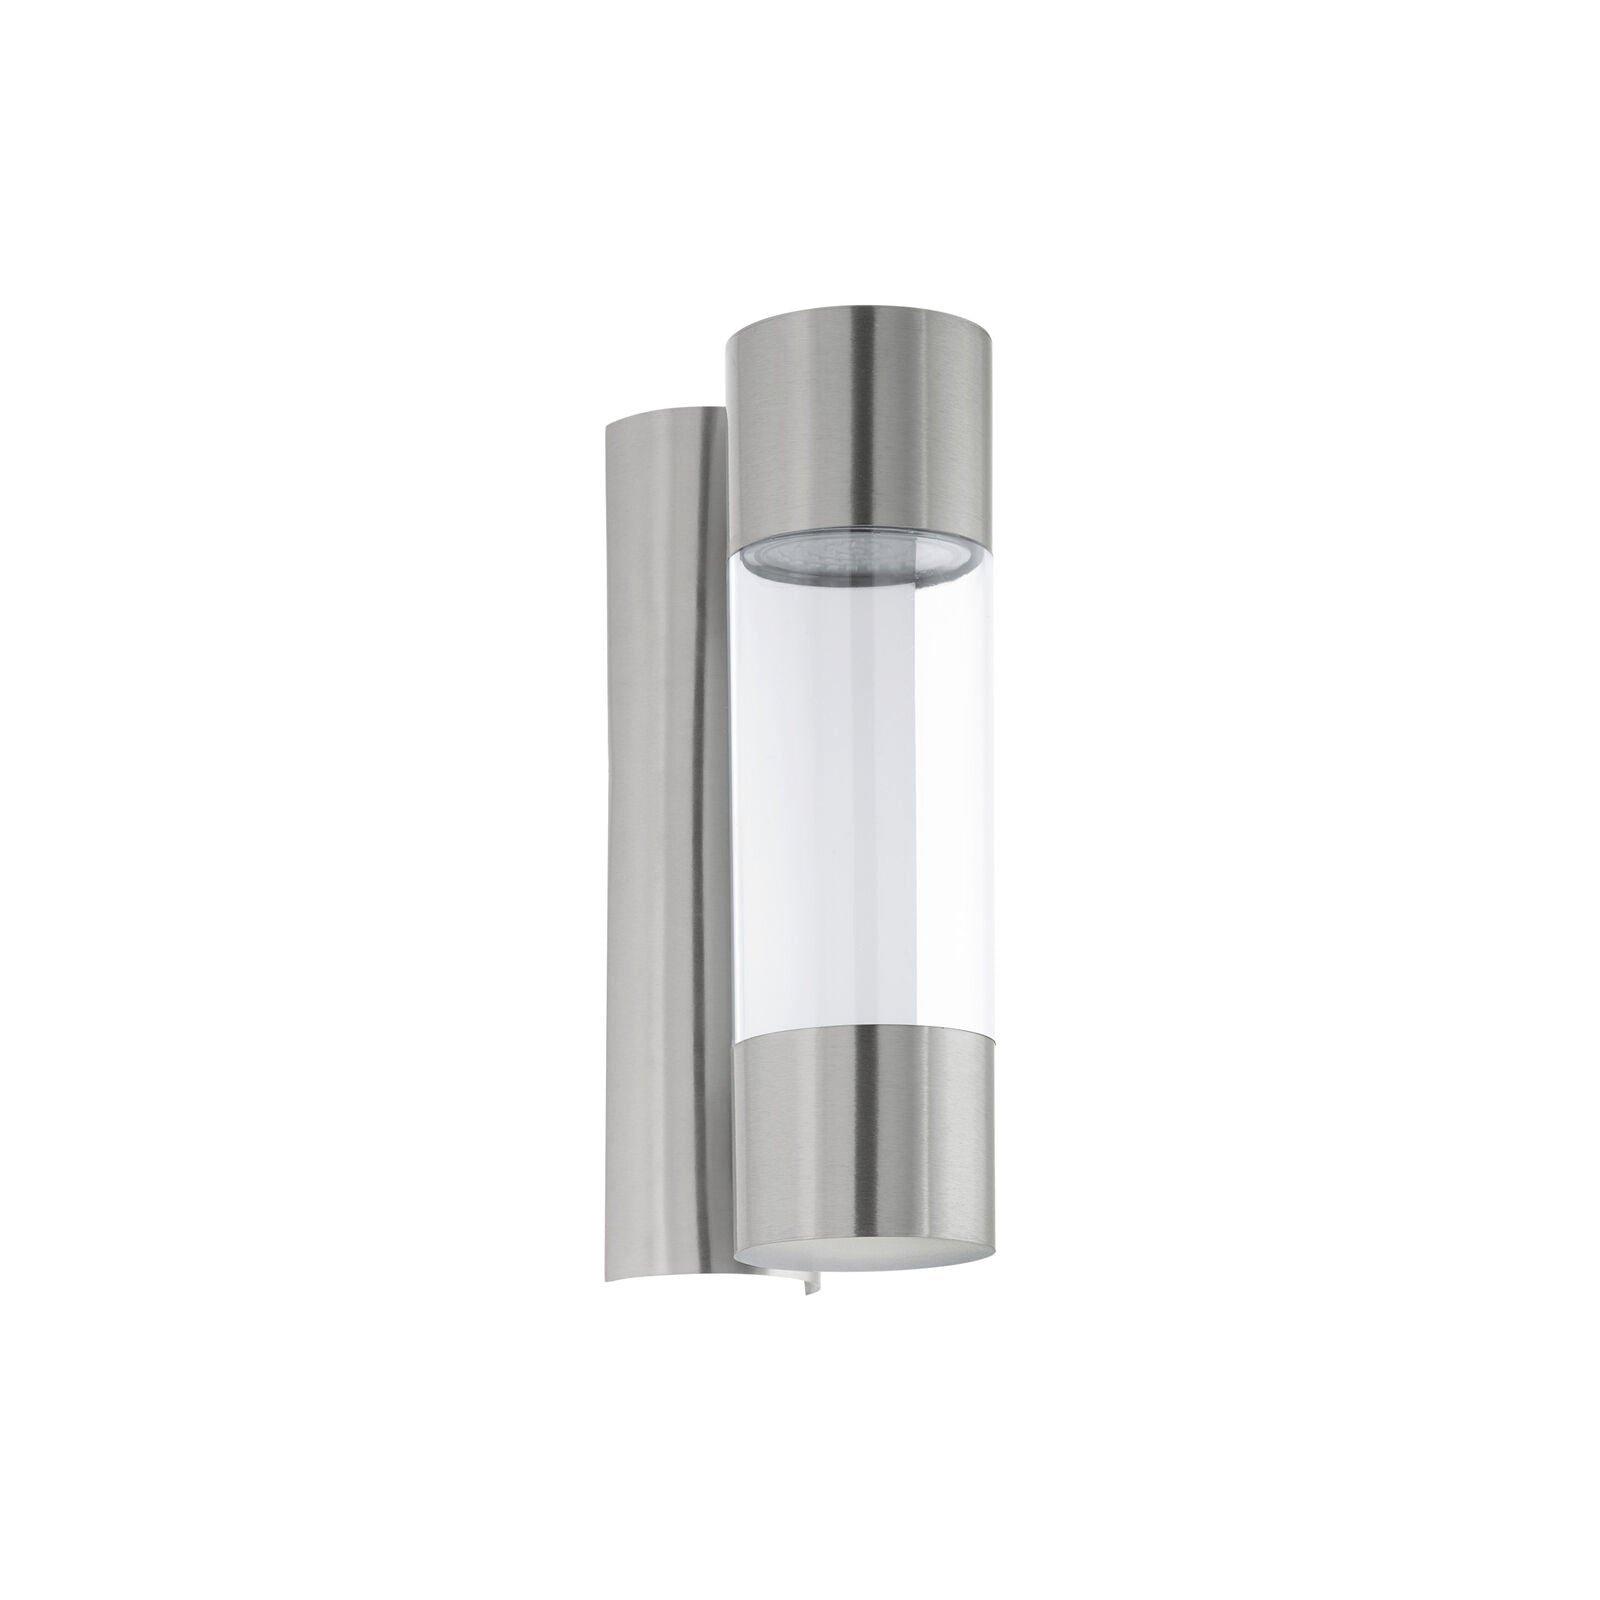 IP44 Outdoor Wall Light Stainless Steel / Glass 3.7W Built in LED Porch Lamp